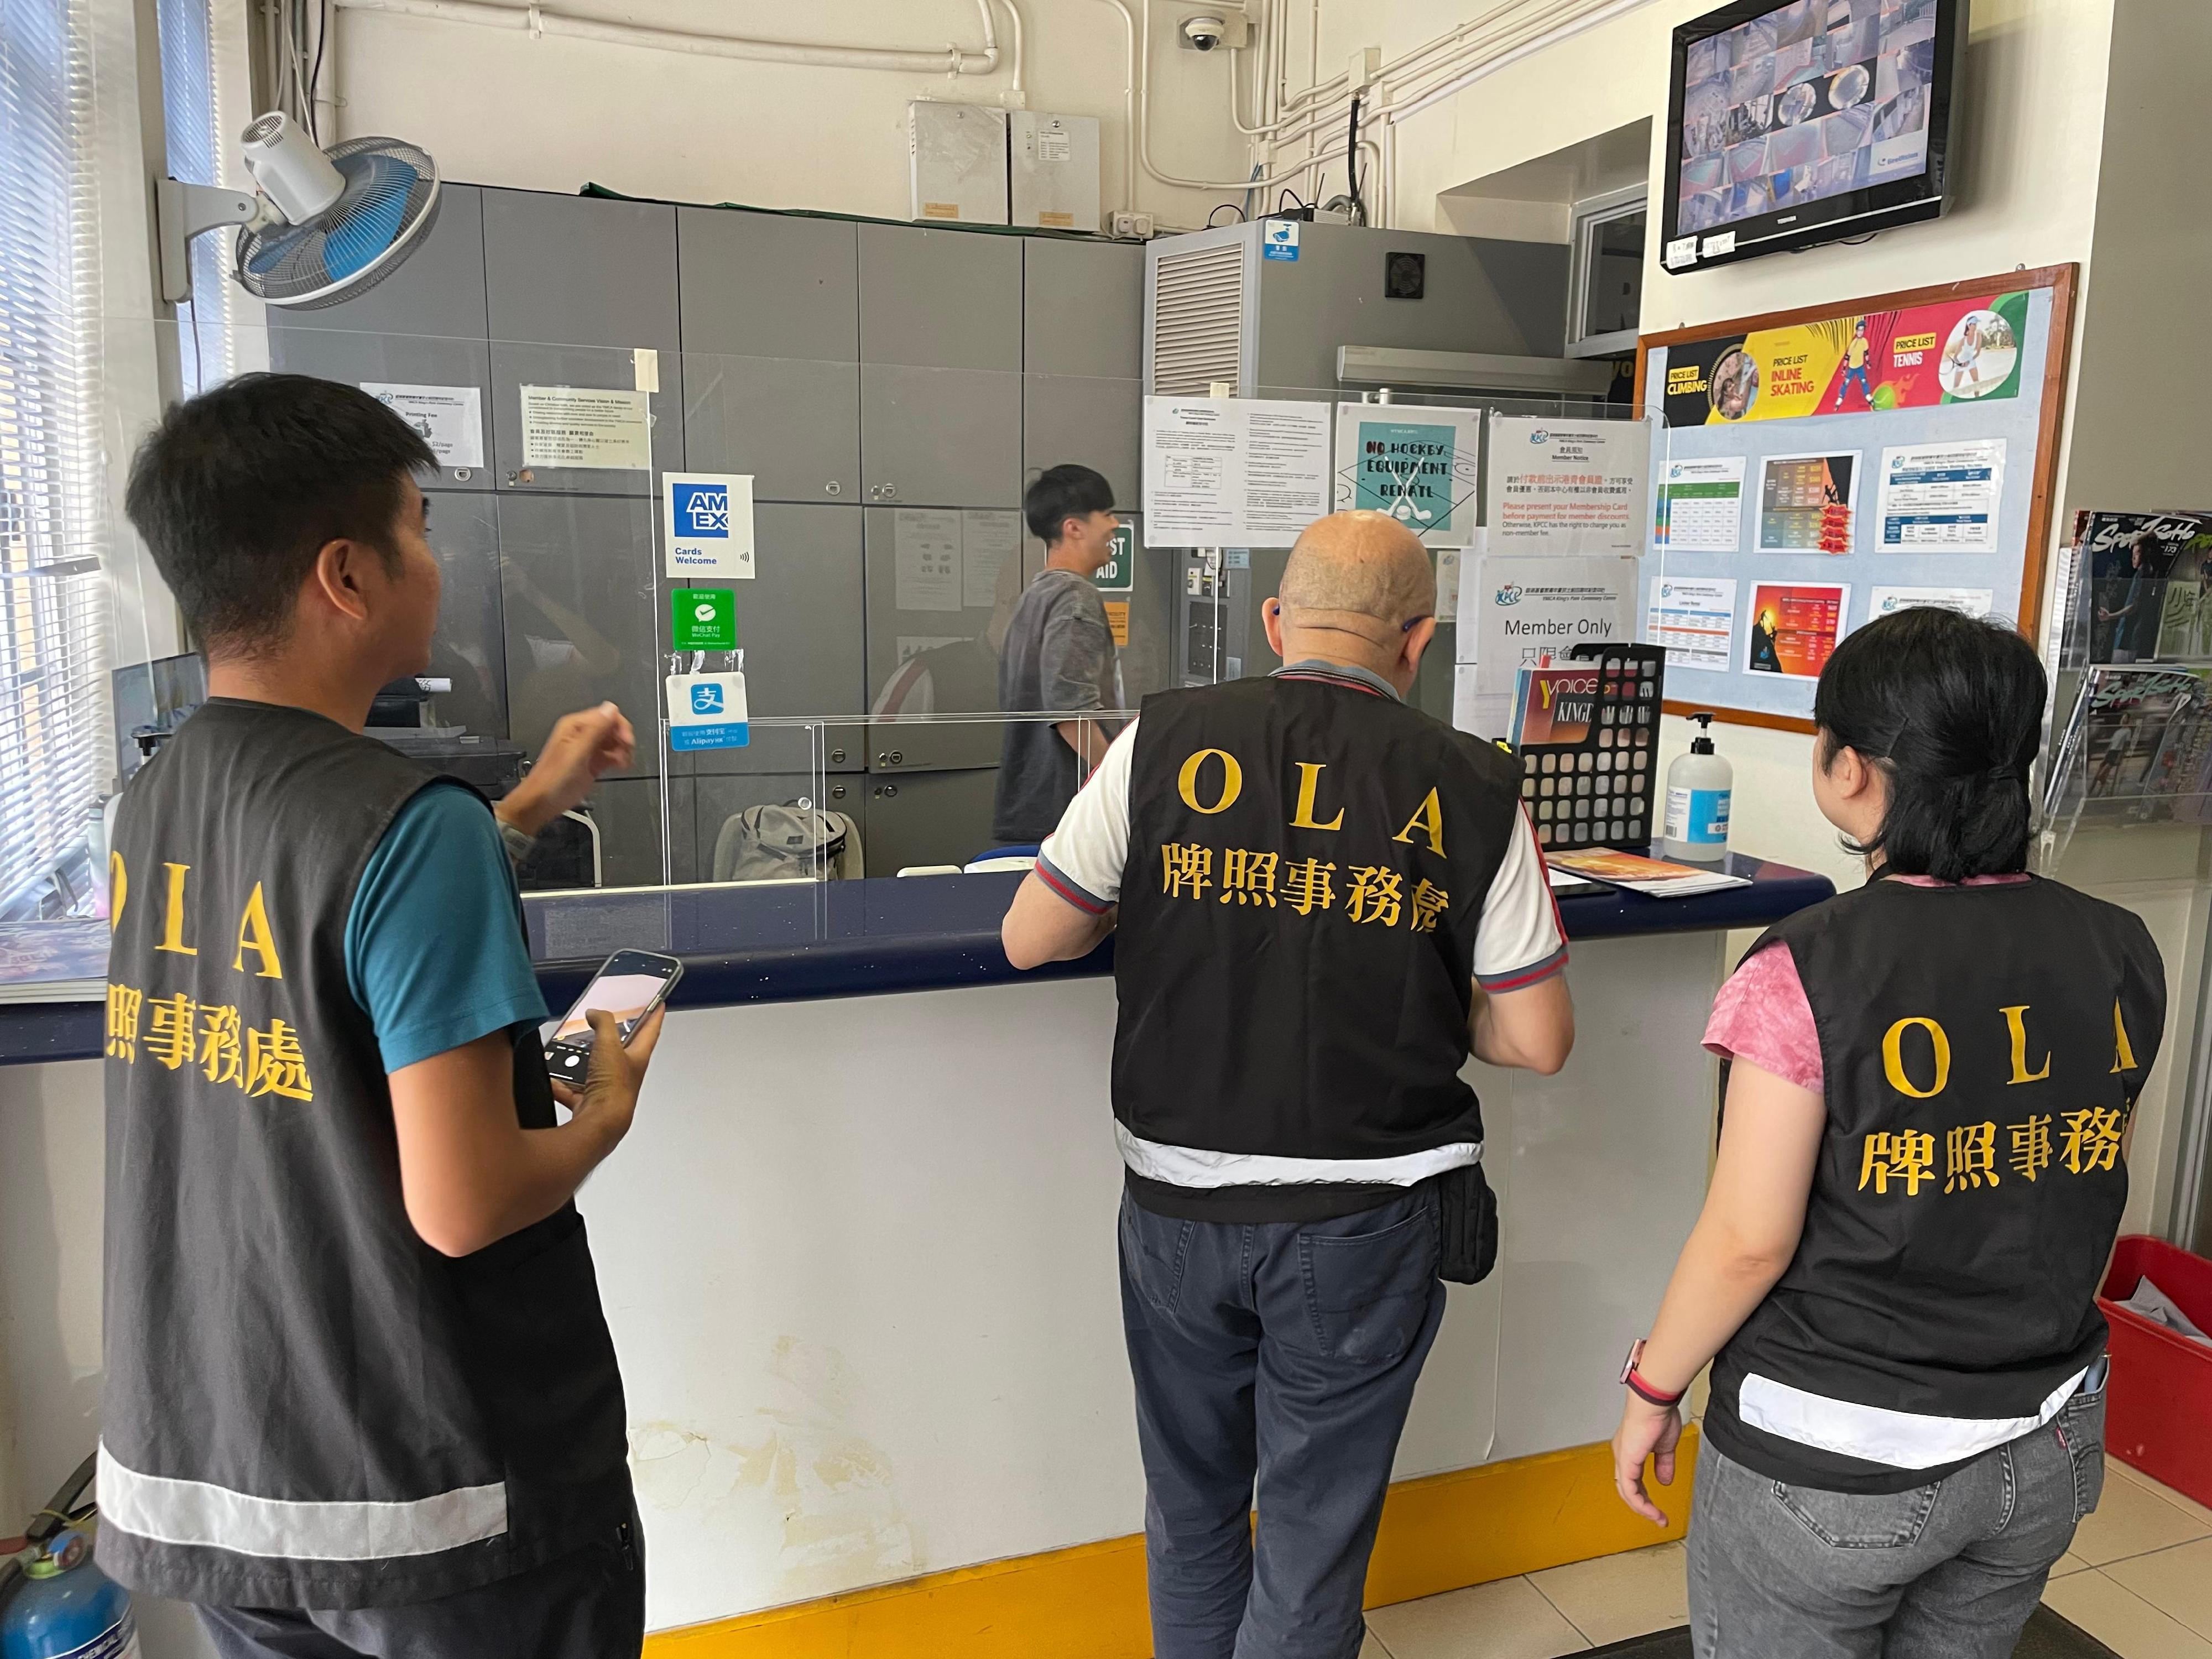 The Office of the Licensing Authority (OLA) of the Home Affairs Department conducted a joint operation with the Fire Services Department codenamed "Solar Flare" against unlicensed hotels/guesthouses and illegal club-house operations for two consecutive days on September 19 and 20 at various spots in Yau Tsim Mong District. Photo shows OLA enforcement officers conducting surprise check at a club-house.